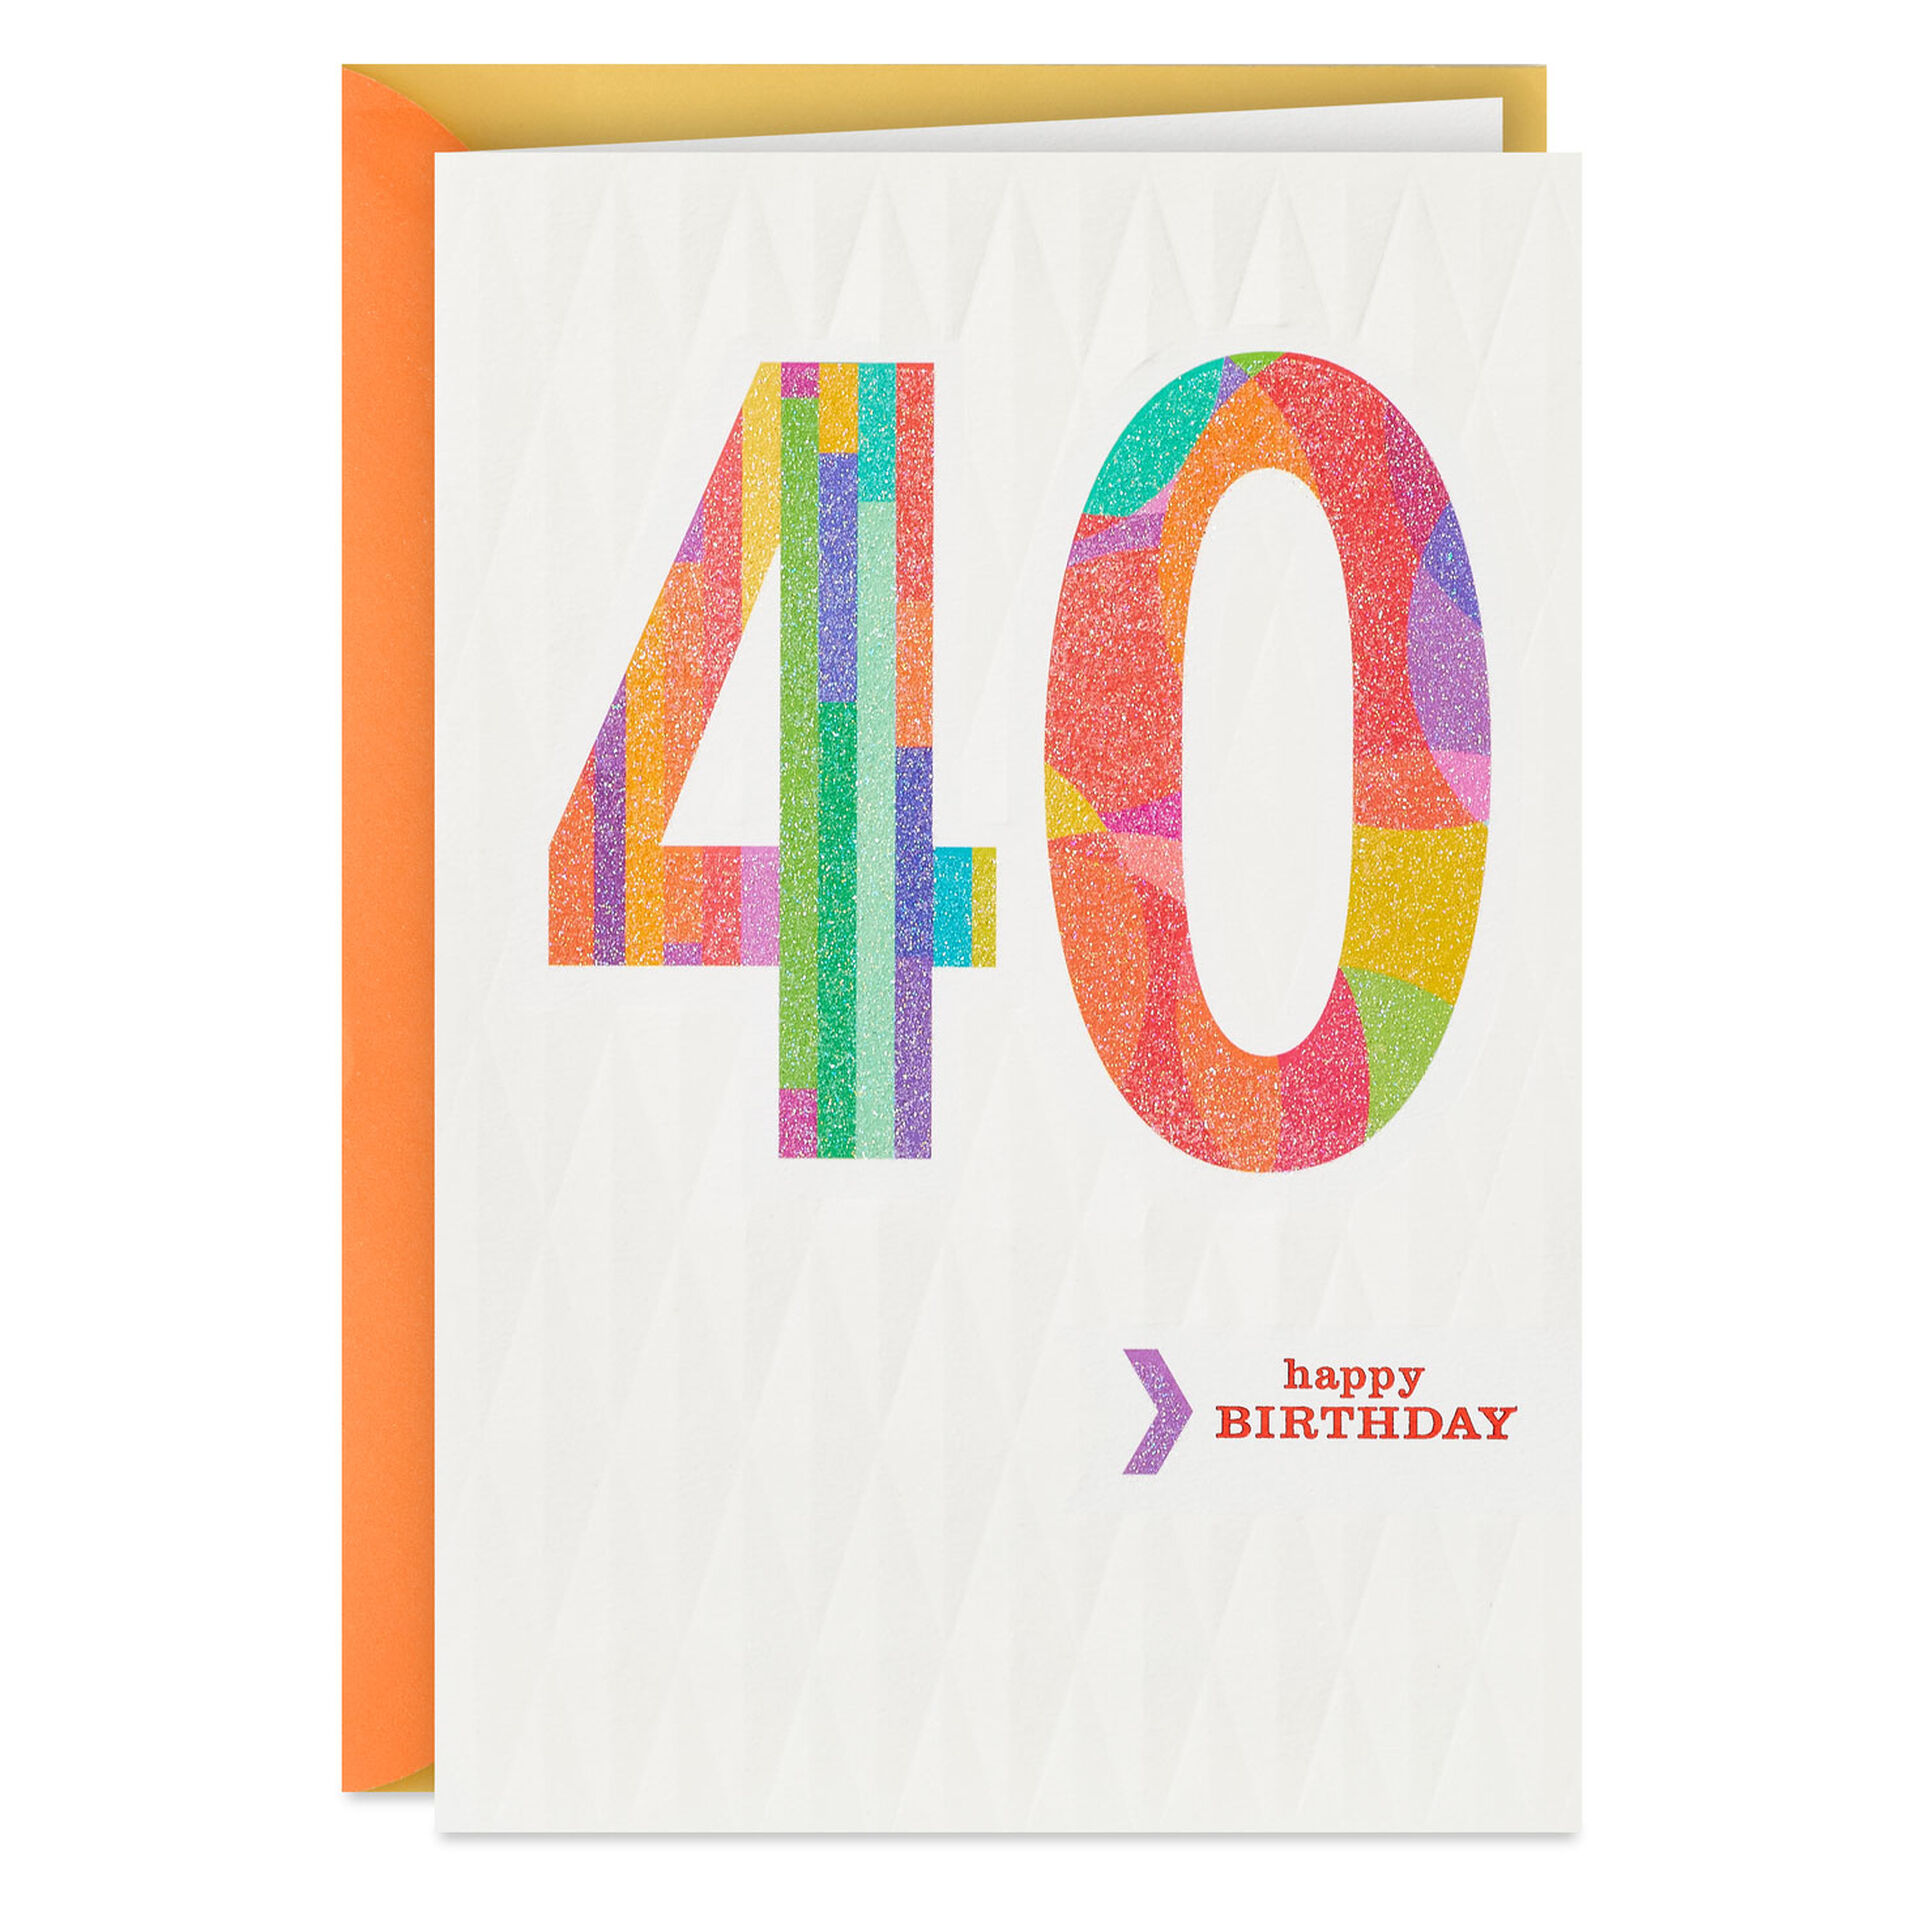 You-Make-a-Difference-40th-Birthday-Card_599HBD3407_01